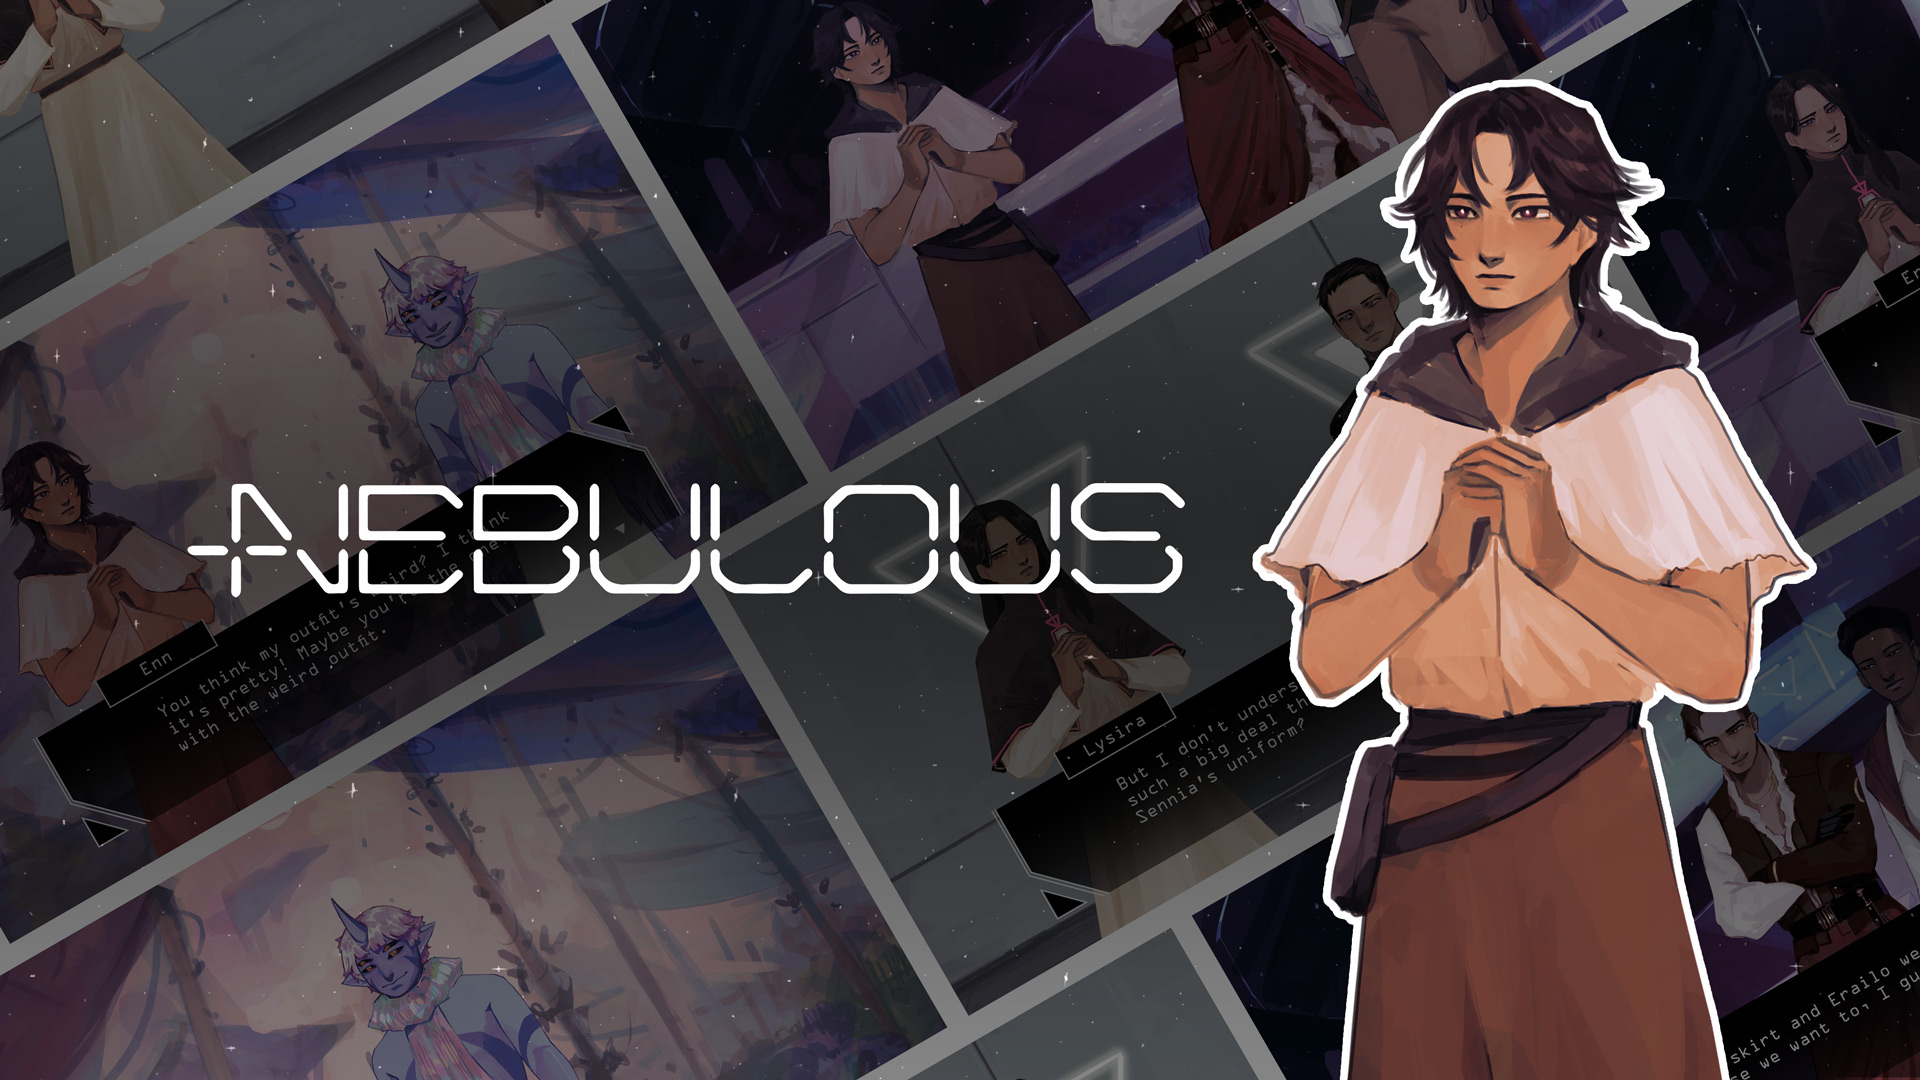 In the background, there is a compilation of screenshots of the visual novel. On top, there is the logo that reads, NEBULOUS, and the main character.